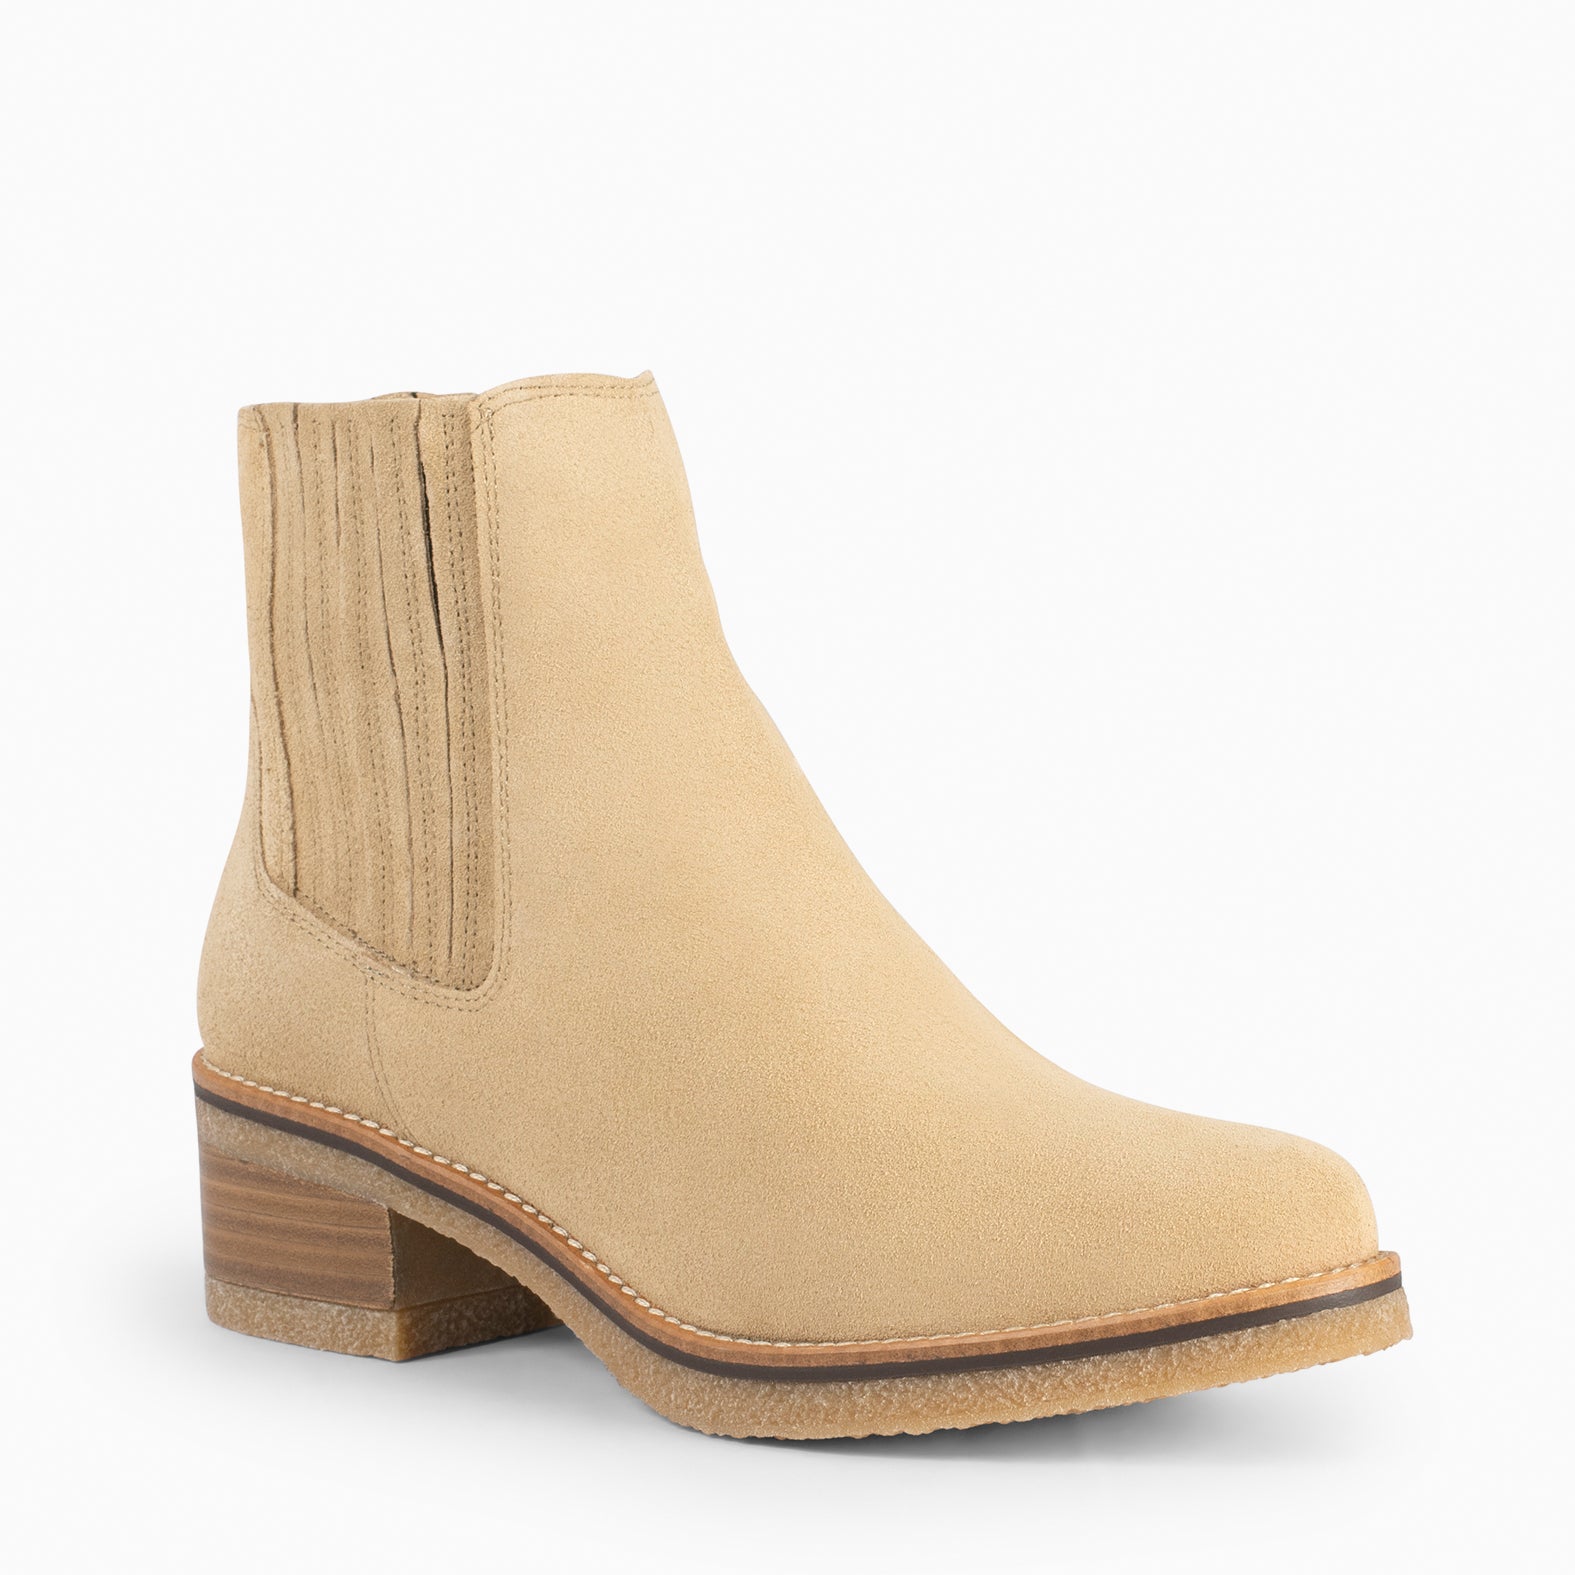 COUNTRY - BEIGE Country Women Booties 